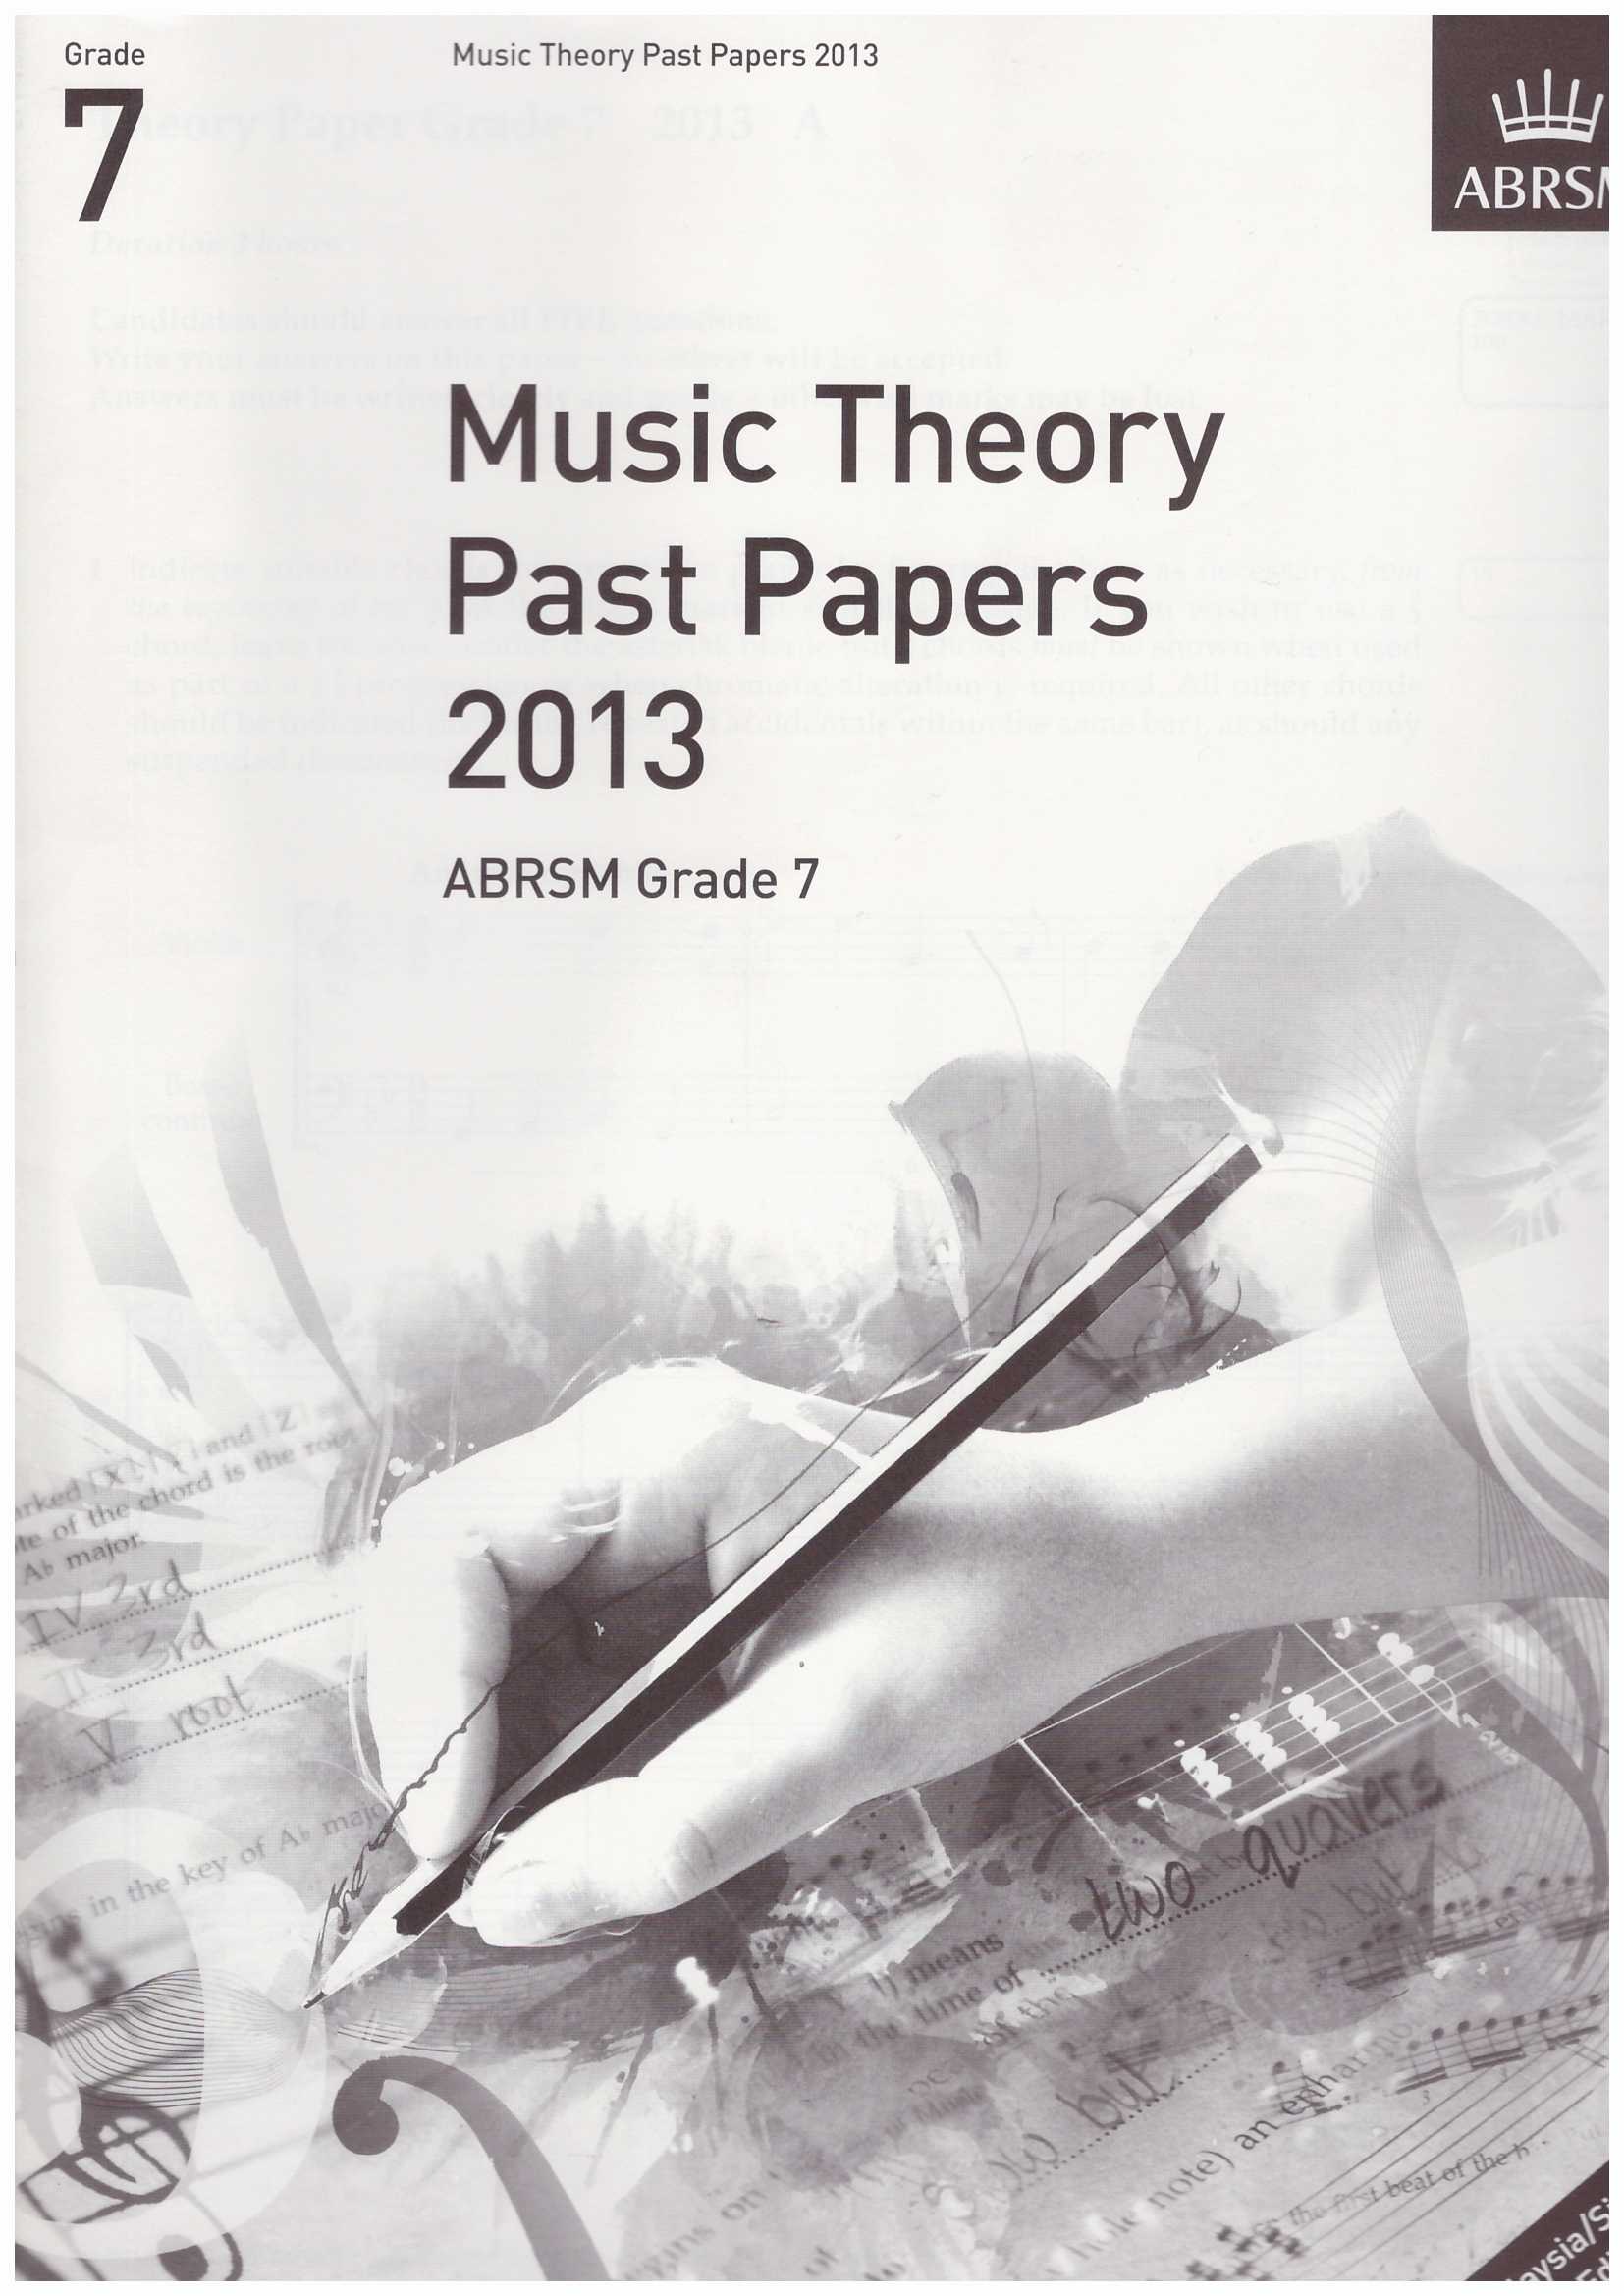 ABRSM Music Theory Practice Papers 2013 Grade 7 / Theory Paper / Theory Exam Paper / Theory Past Year Paper / Past Paper